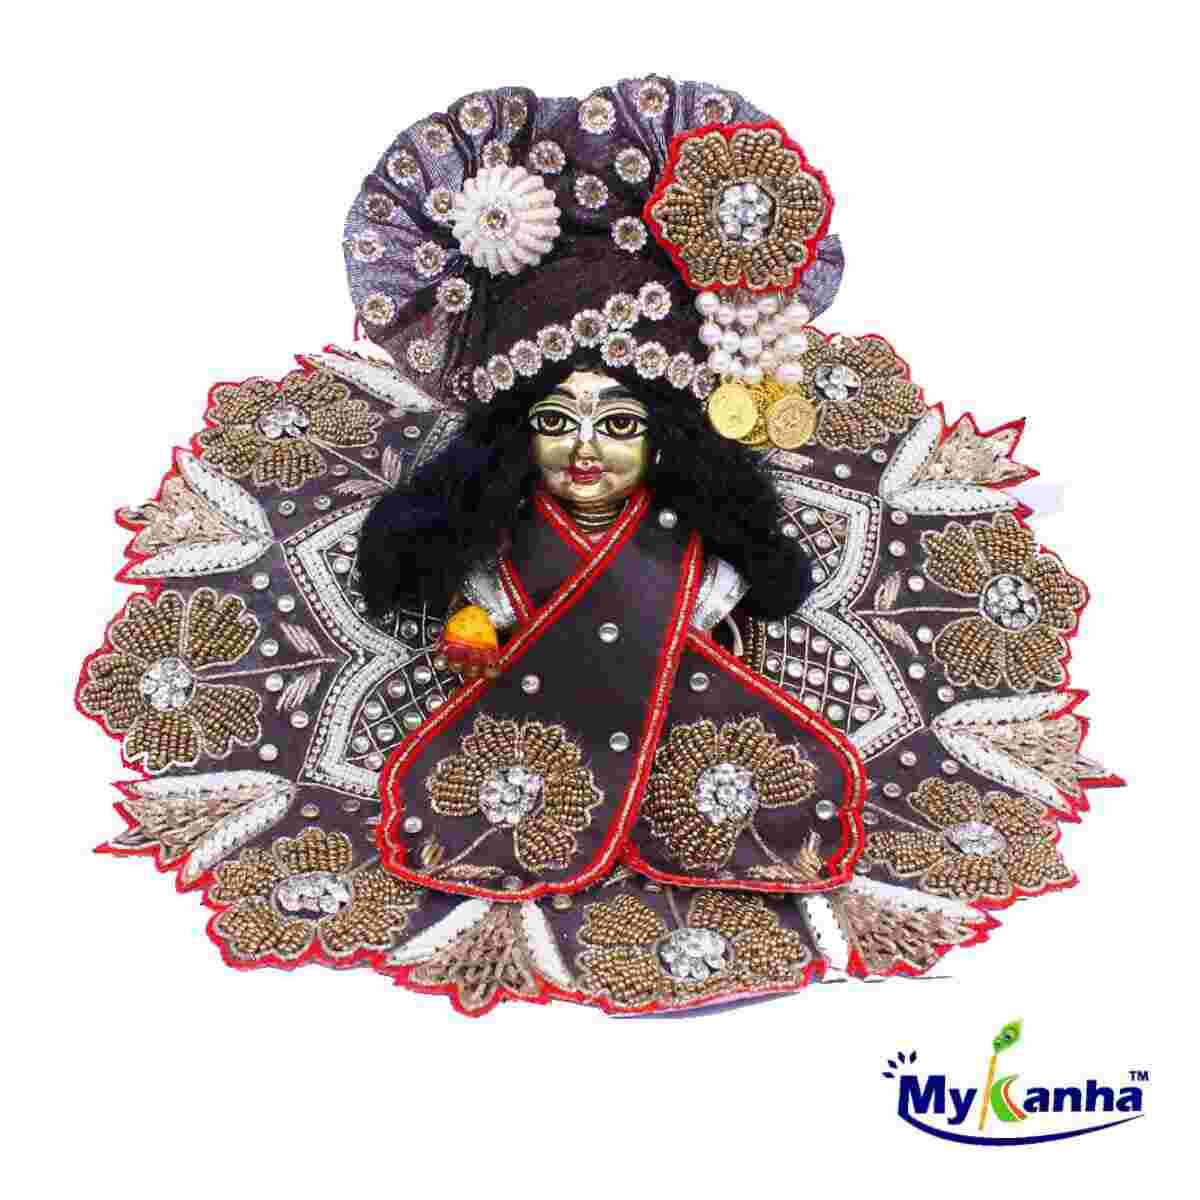 Heavy decorated designer dress for Laddu Gopal with Pagdi